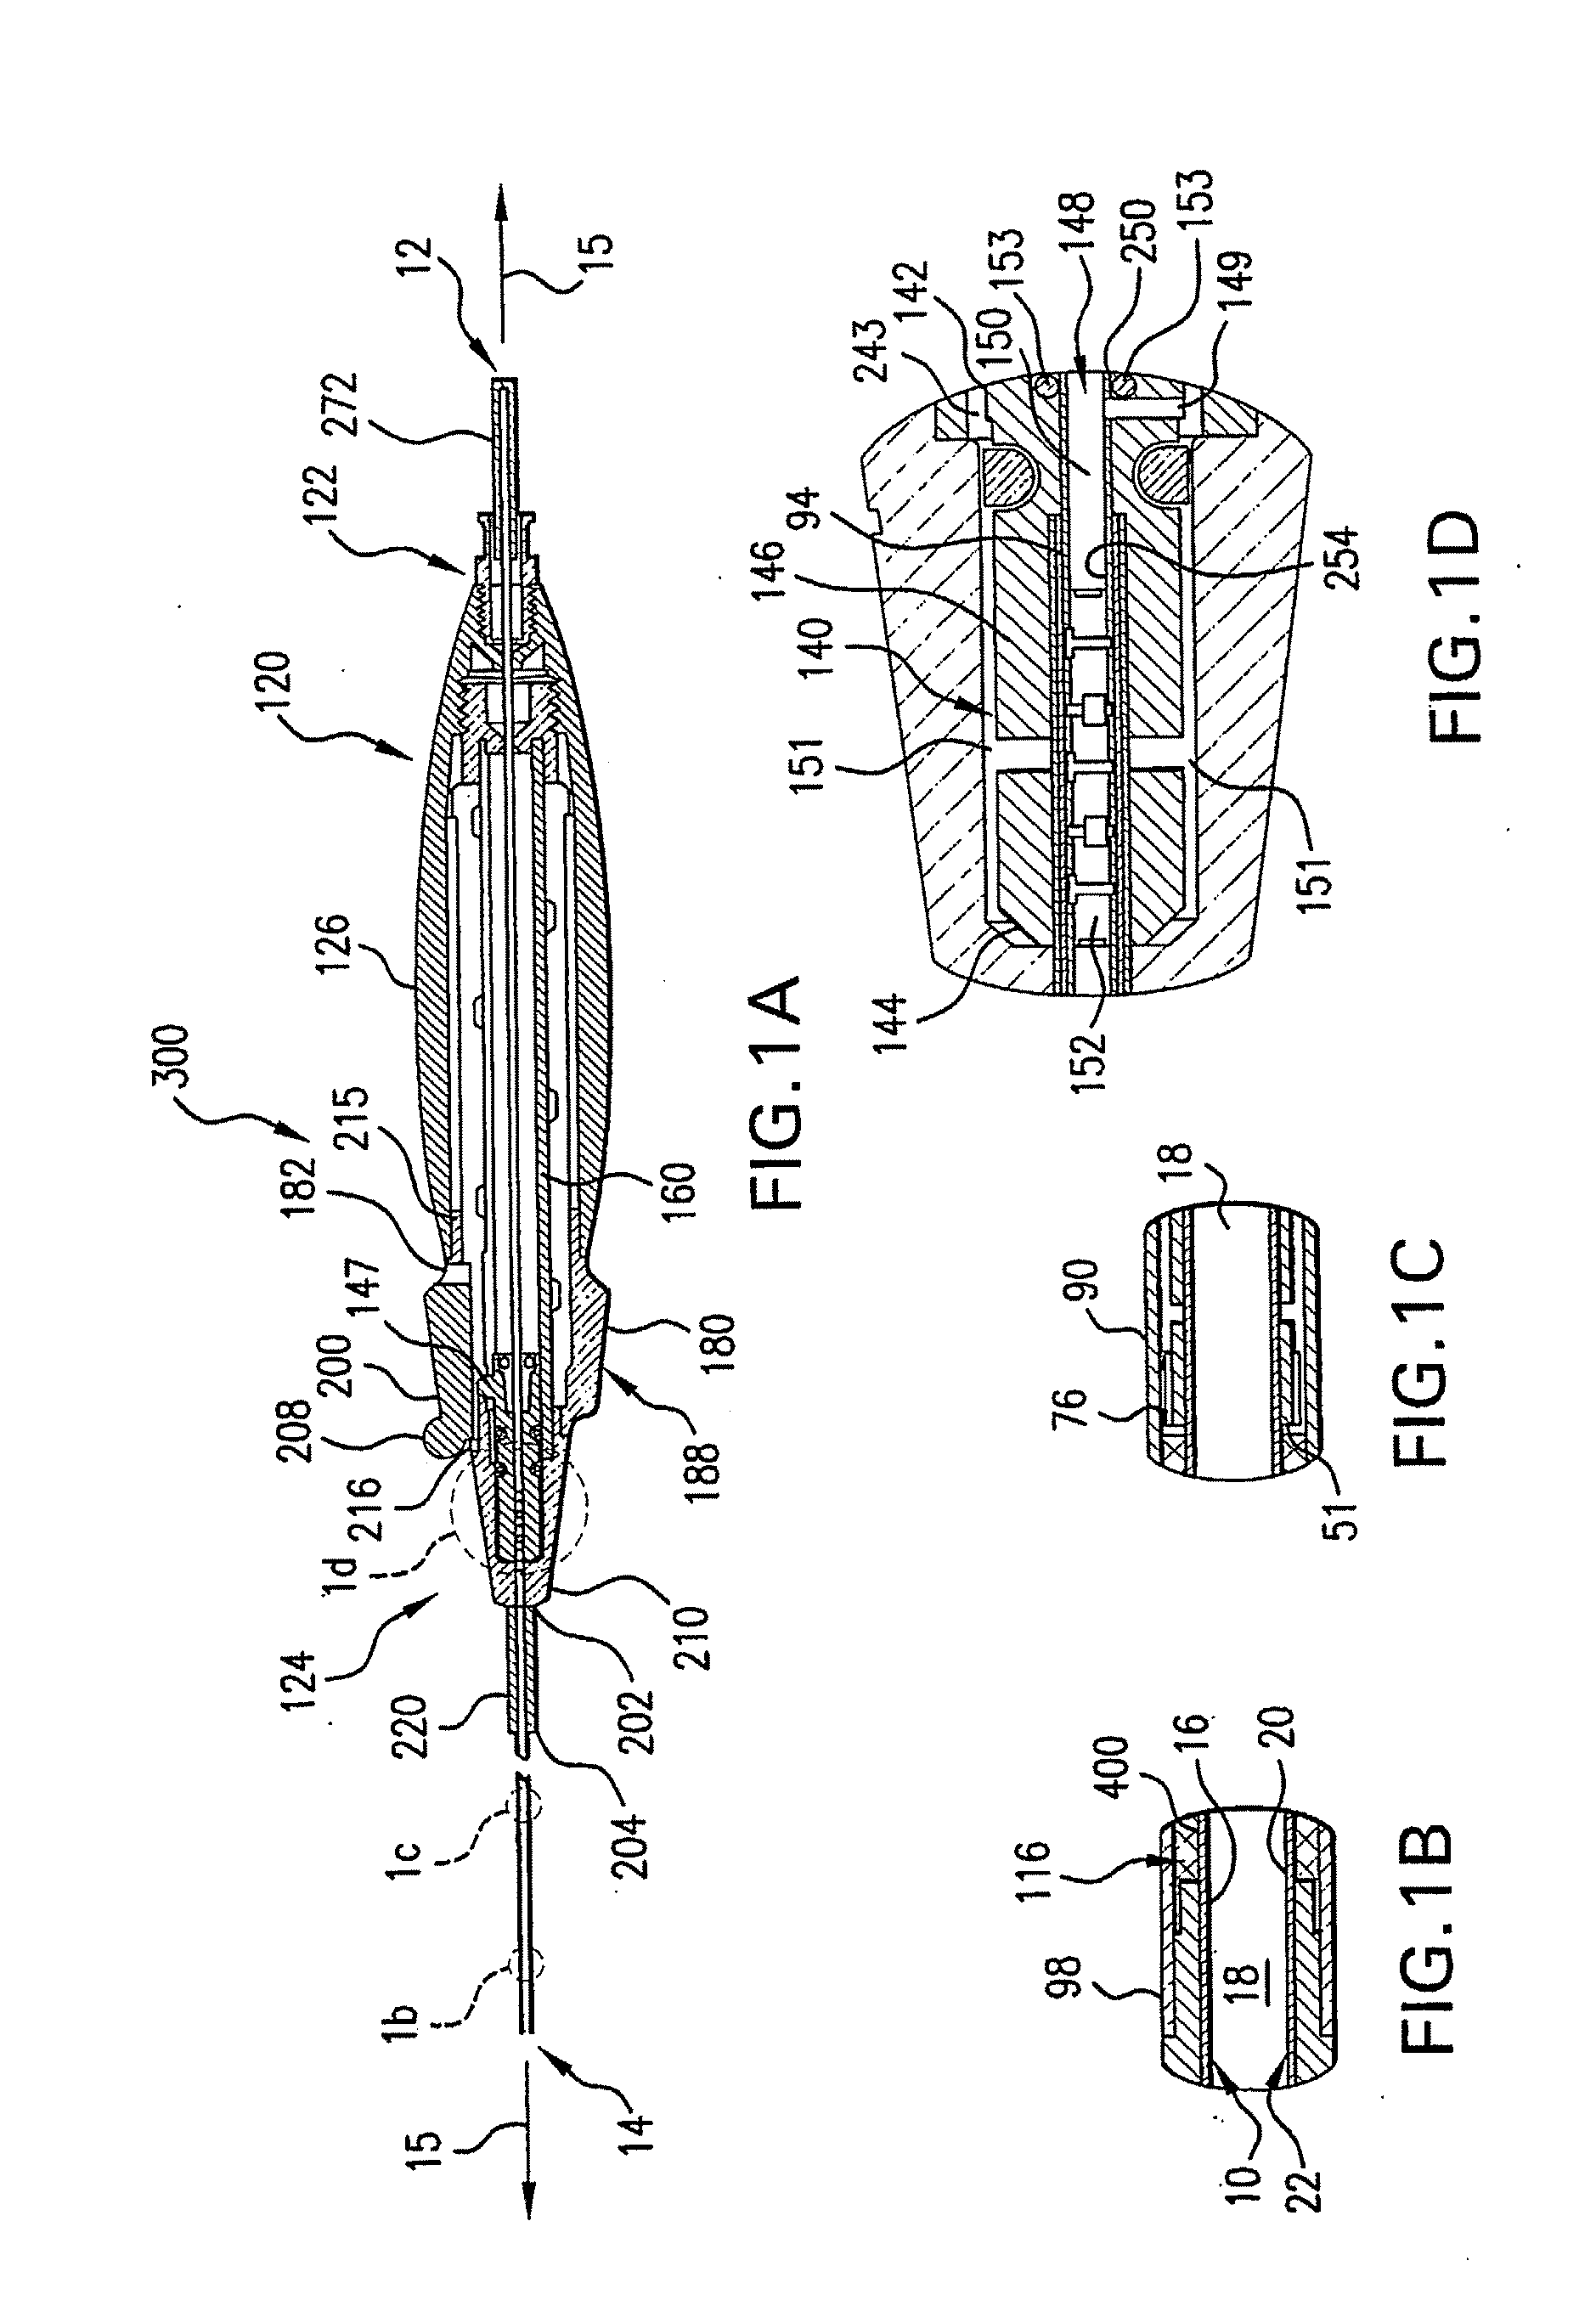 Delivery system for a medical device